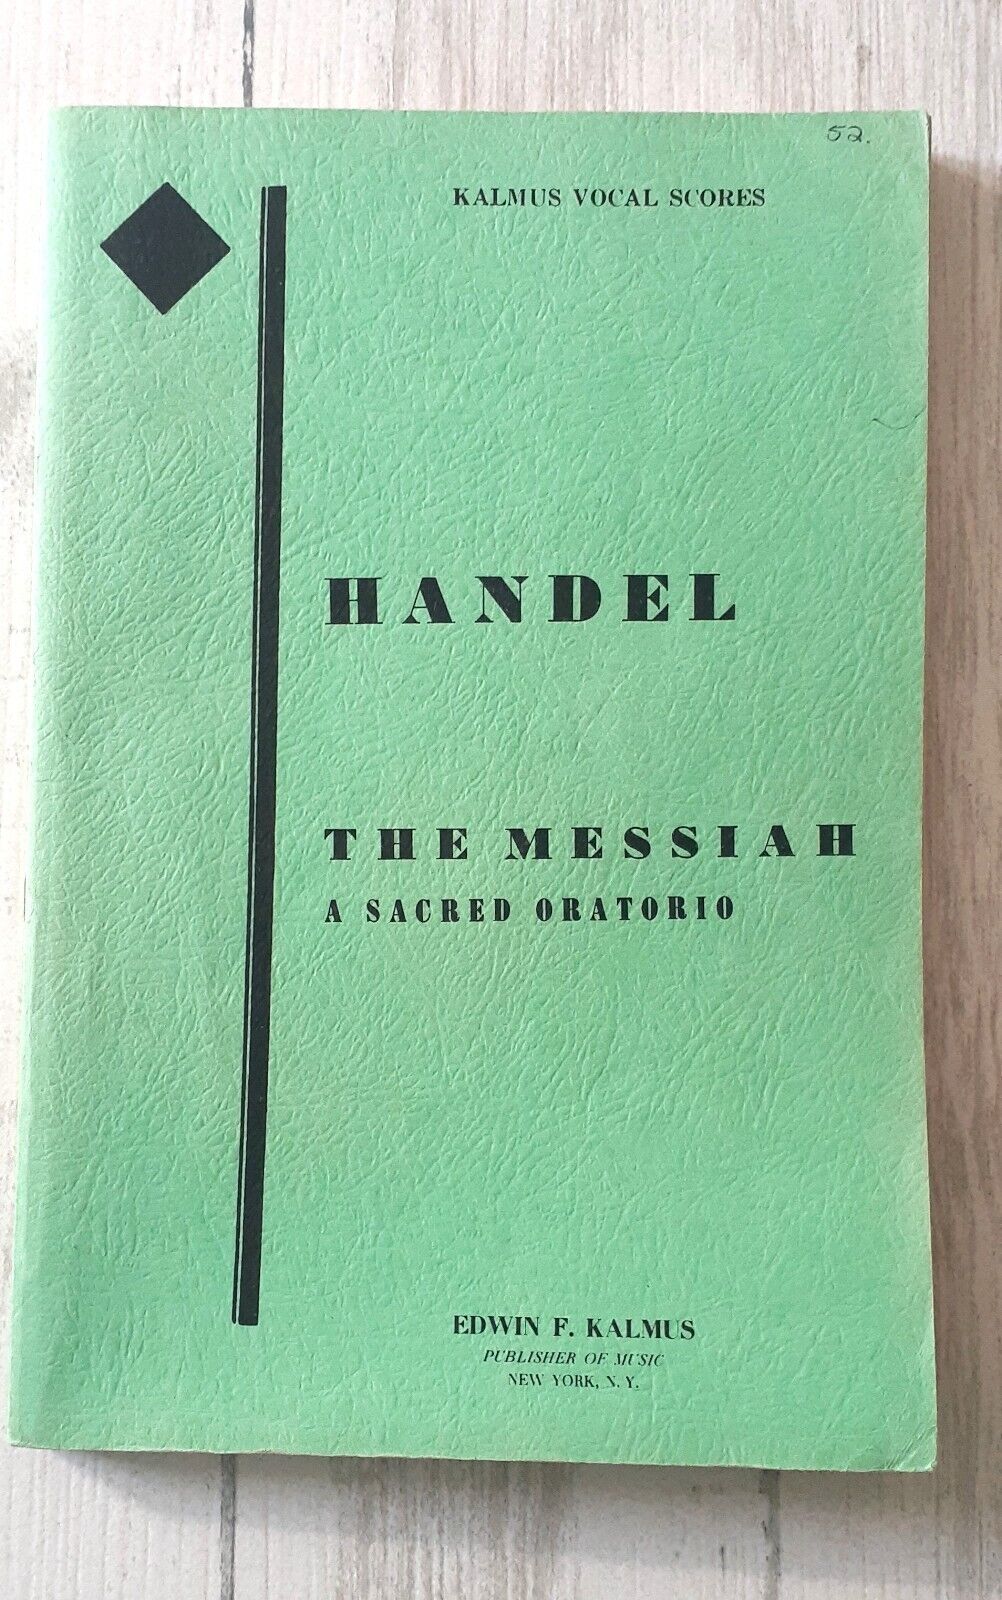 Handels THE MESSIAH Music Book by Edward Kalmus, Vocal Score , Very Clean